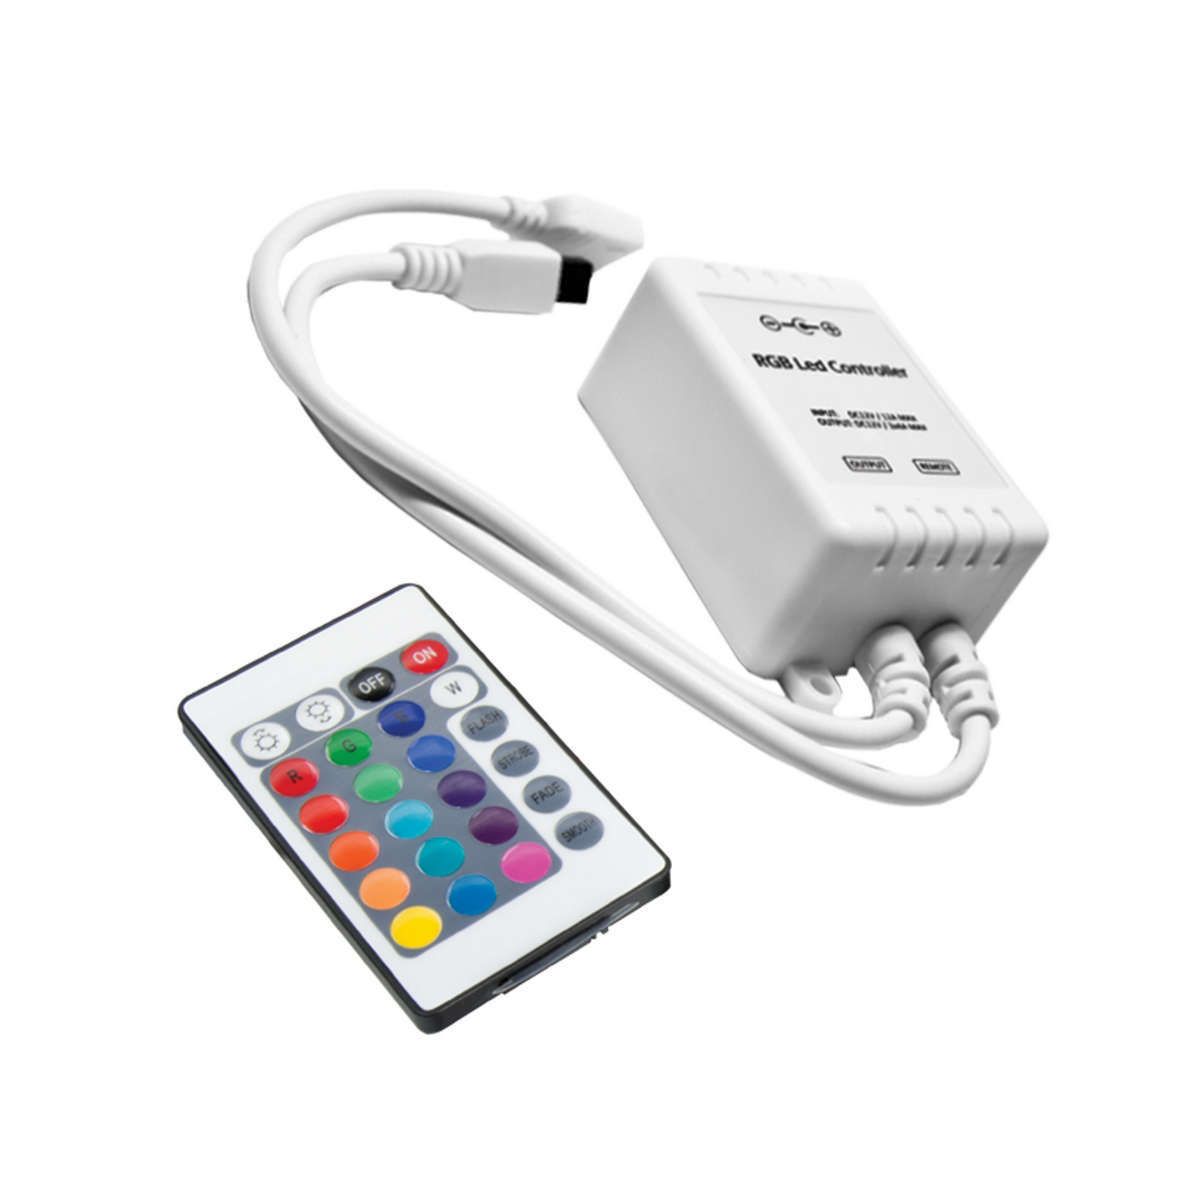 ORACLE LIGHTING LED Light Controller ColorShift Wireless Remote Included Kit